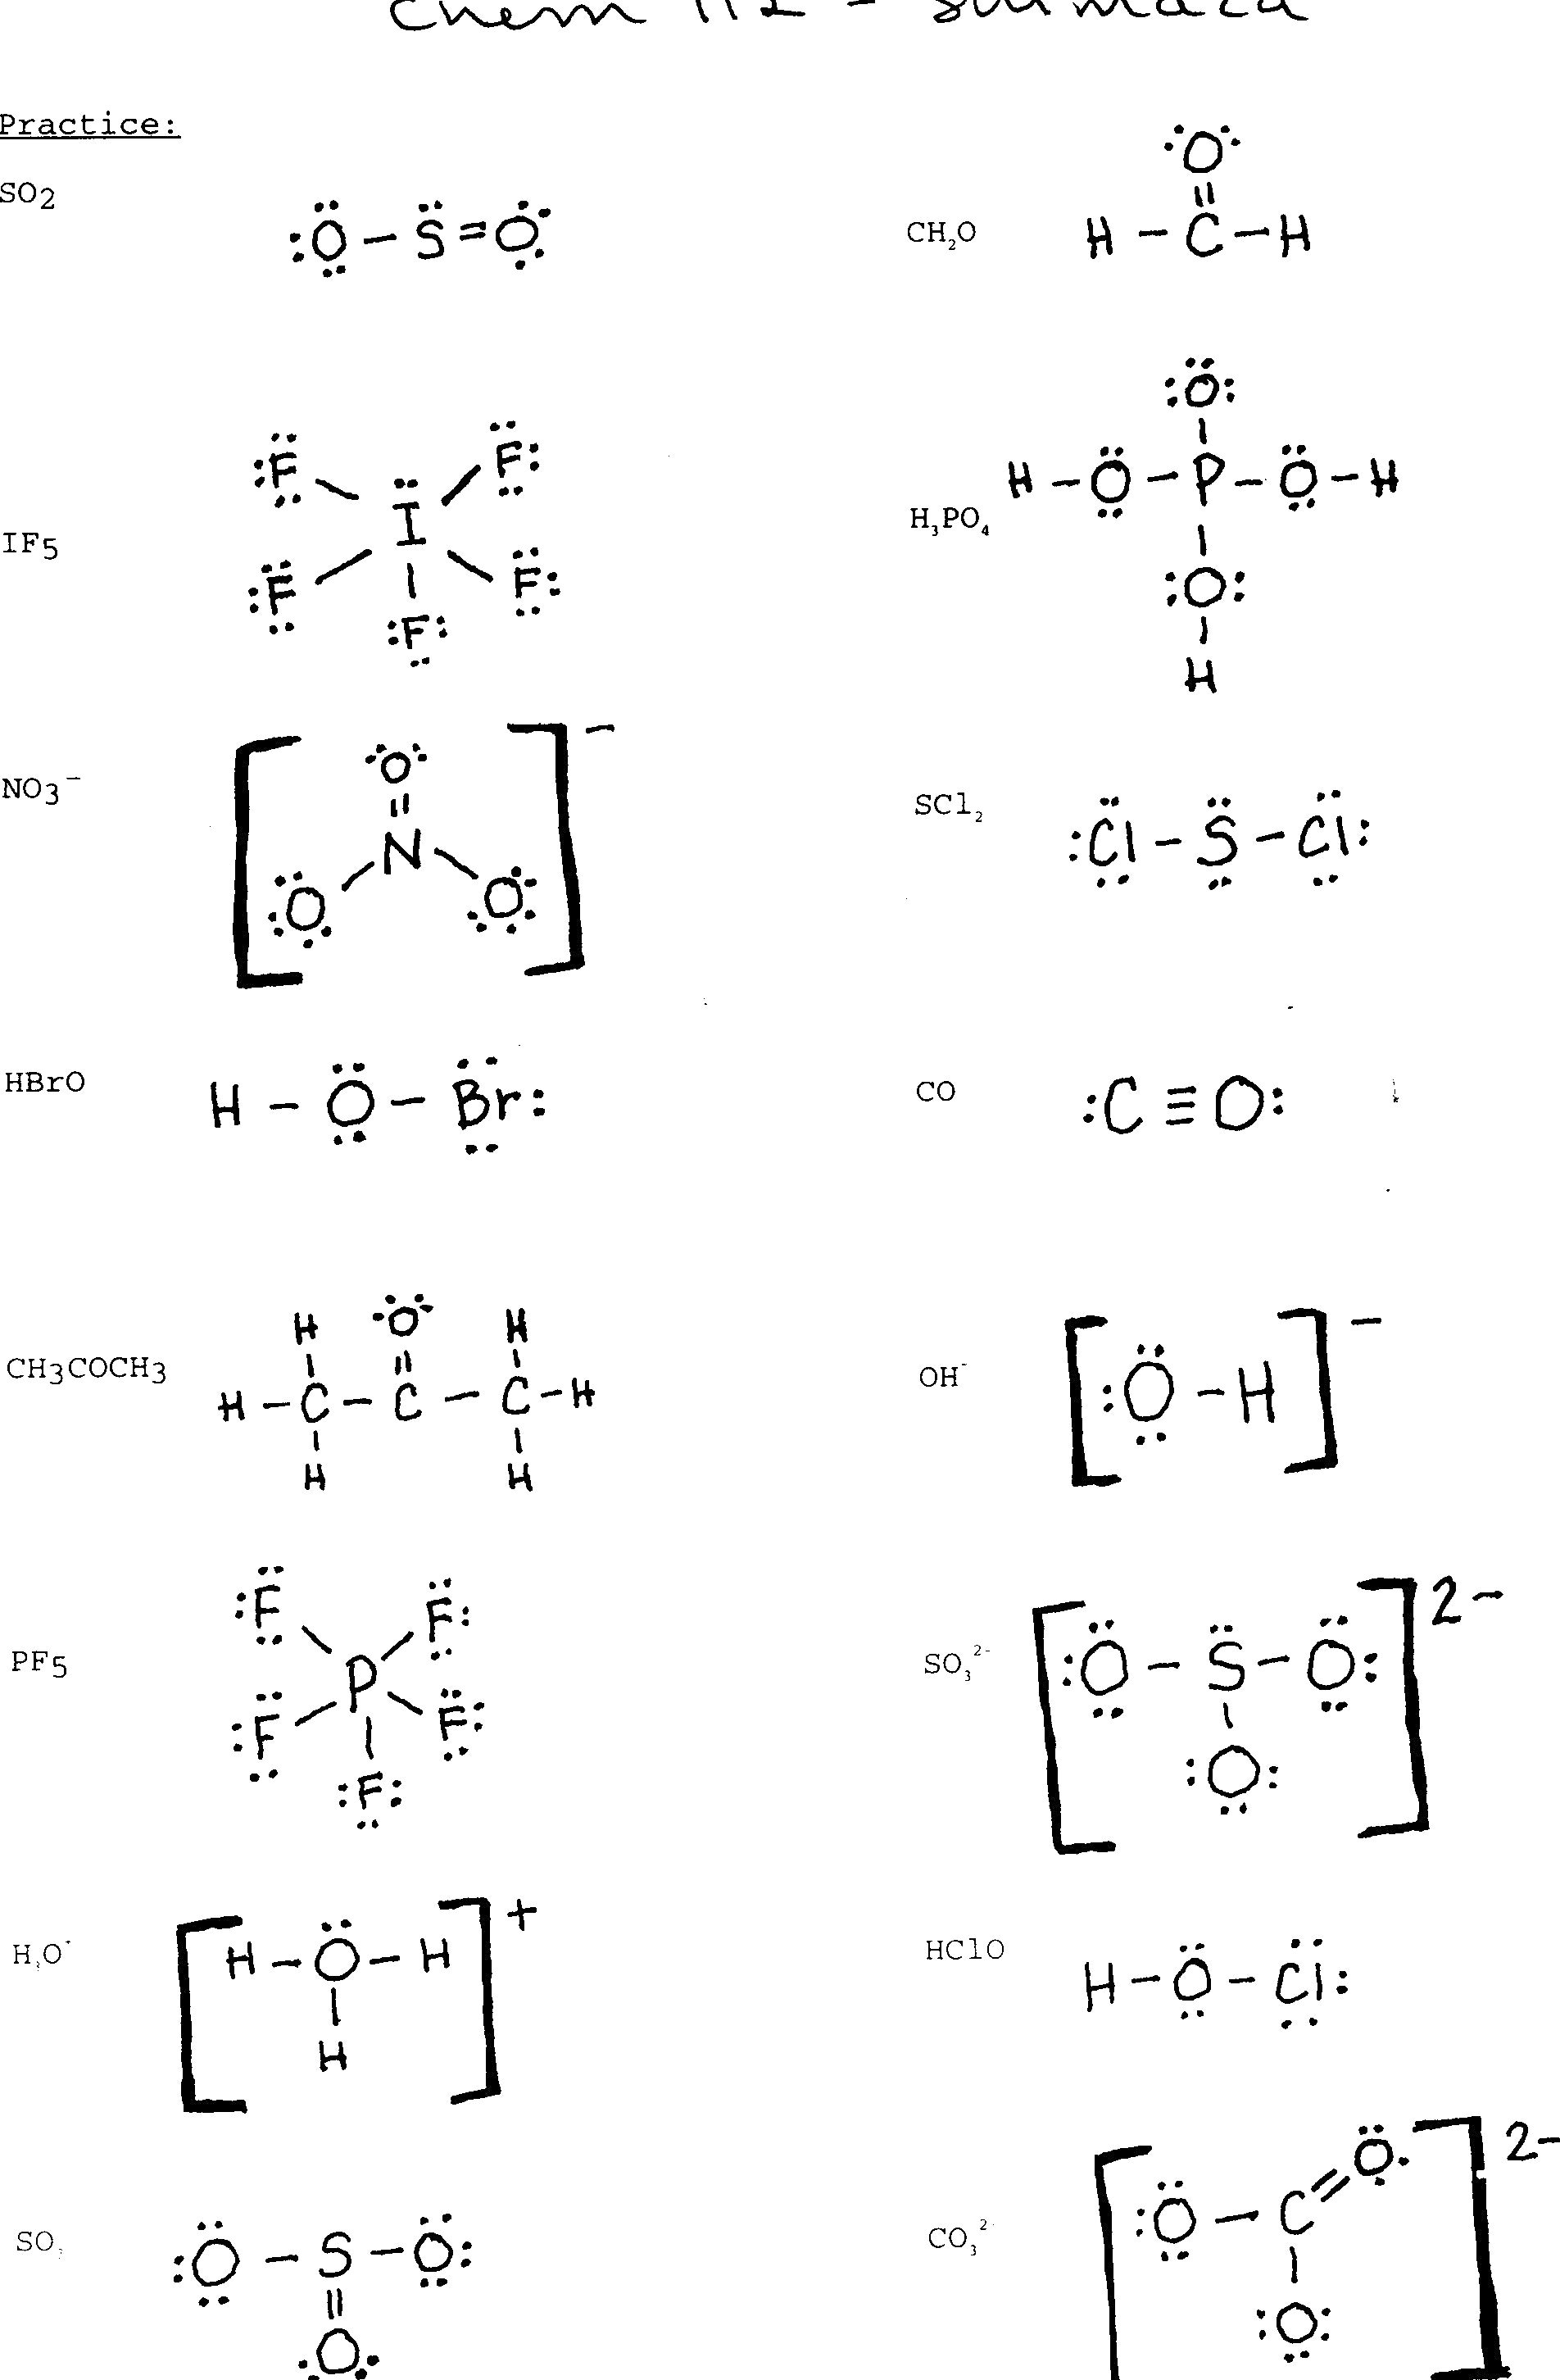 Lewis Structure Worksheet With Answers Algebra Worksheets Pedigree With Worksheet Electron Dot Diagrams And Lewis Structures Answers